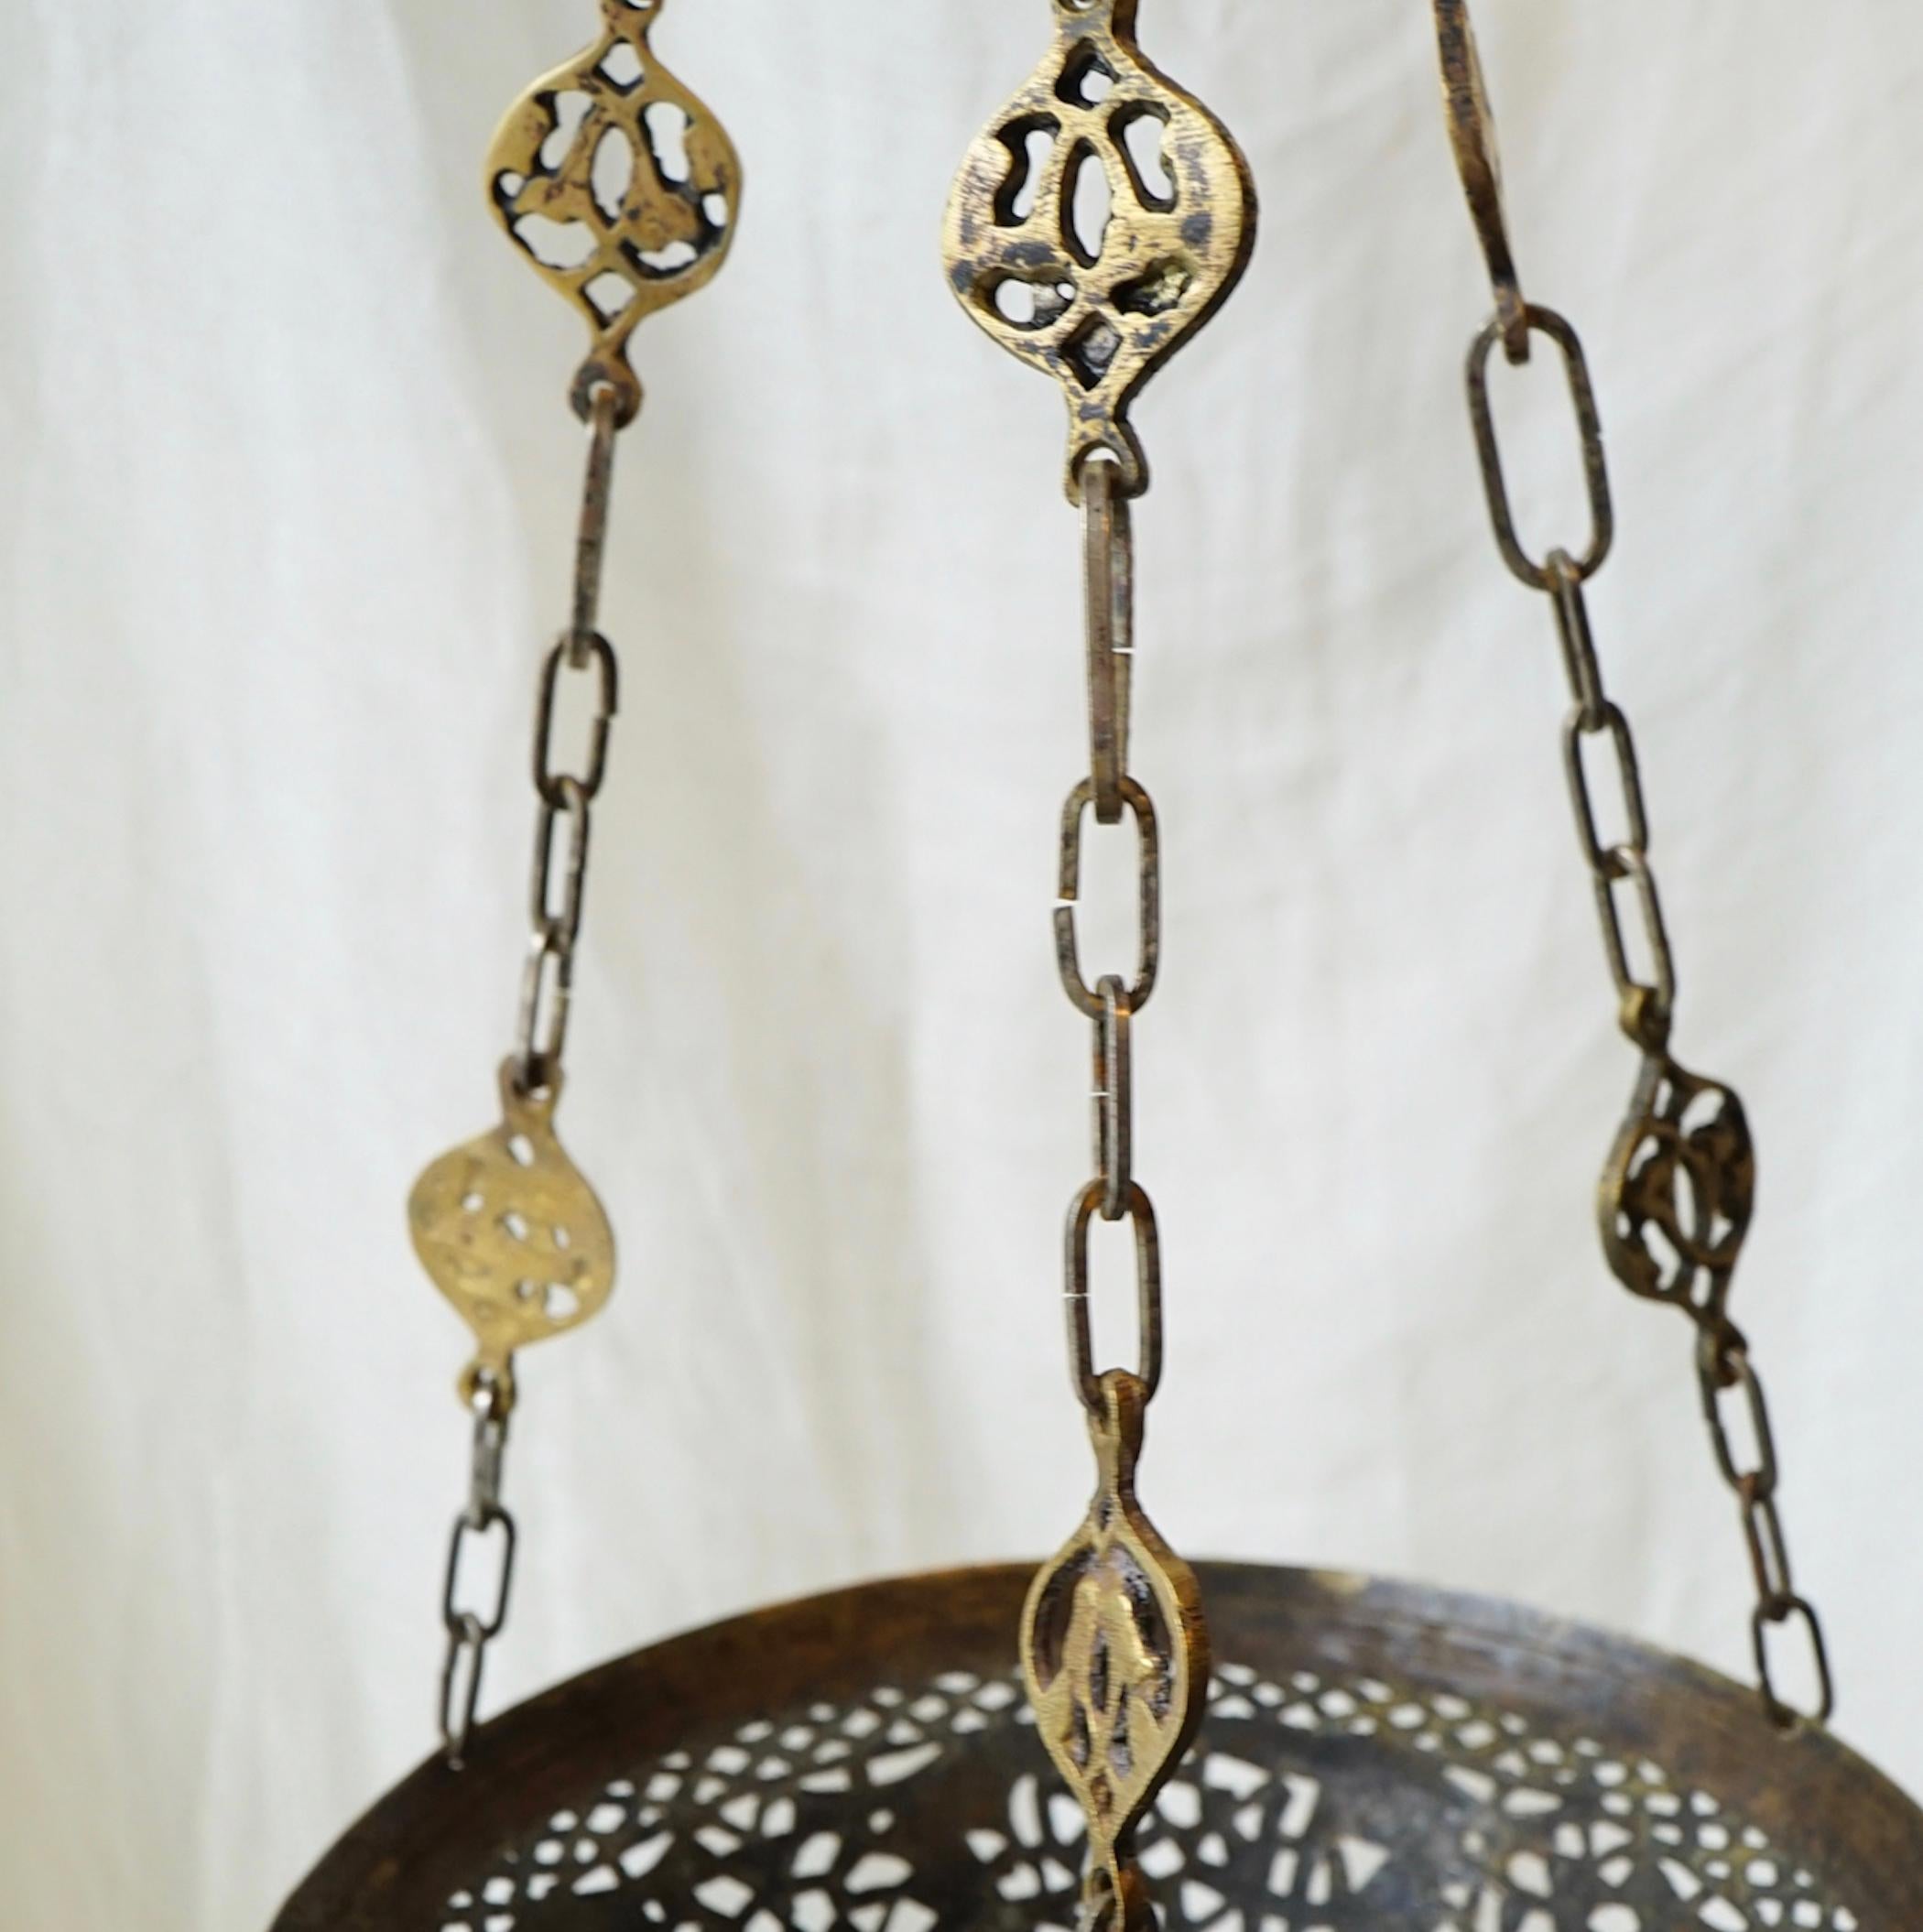 Moroccan Metalwork Pendant circa 1940s In Good Condition For Sale In Sag Harbor, NY